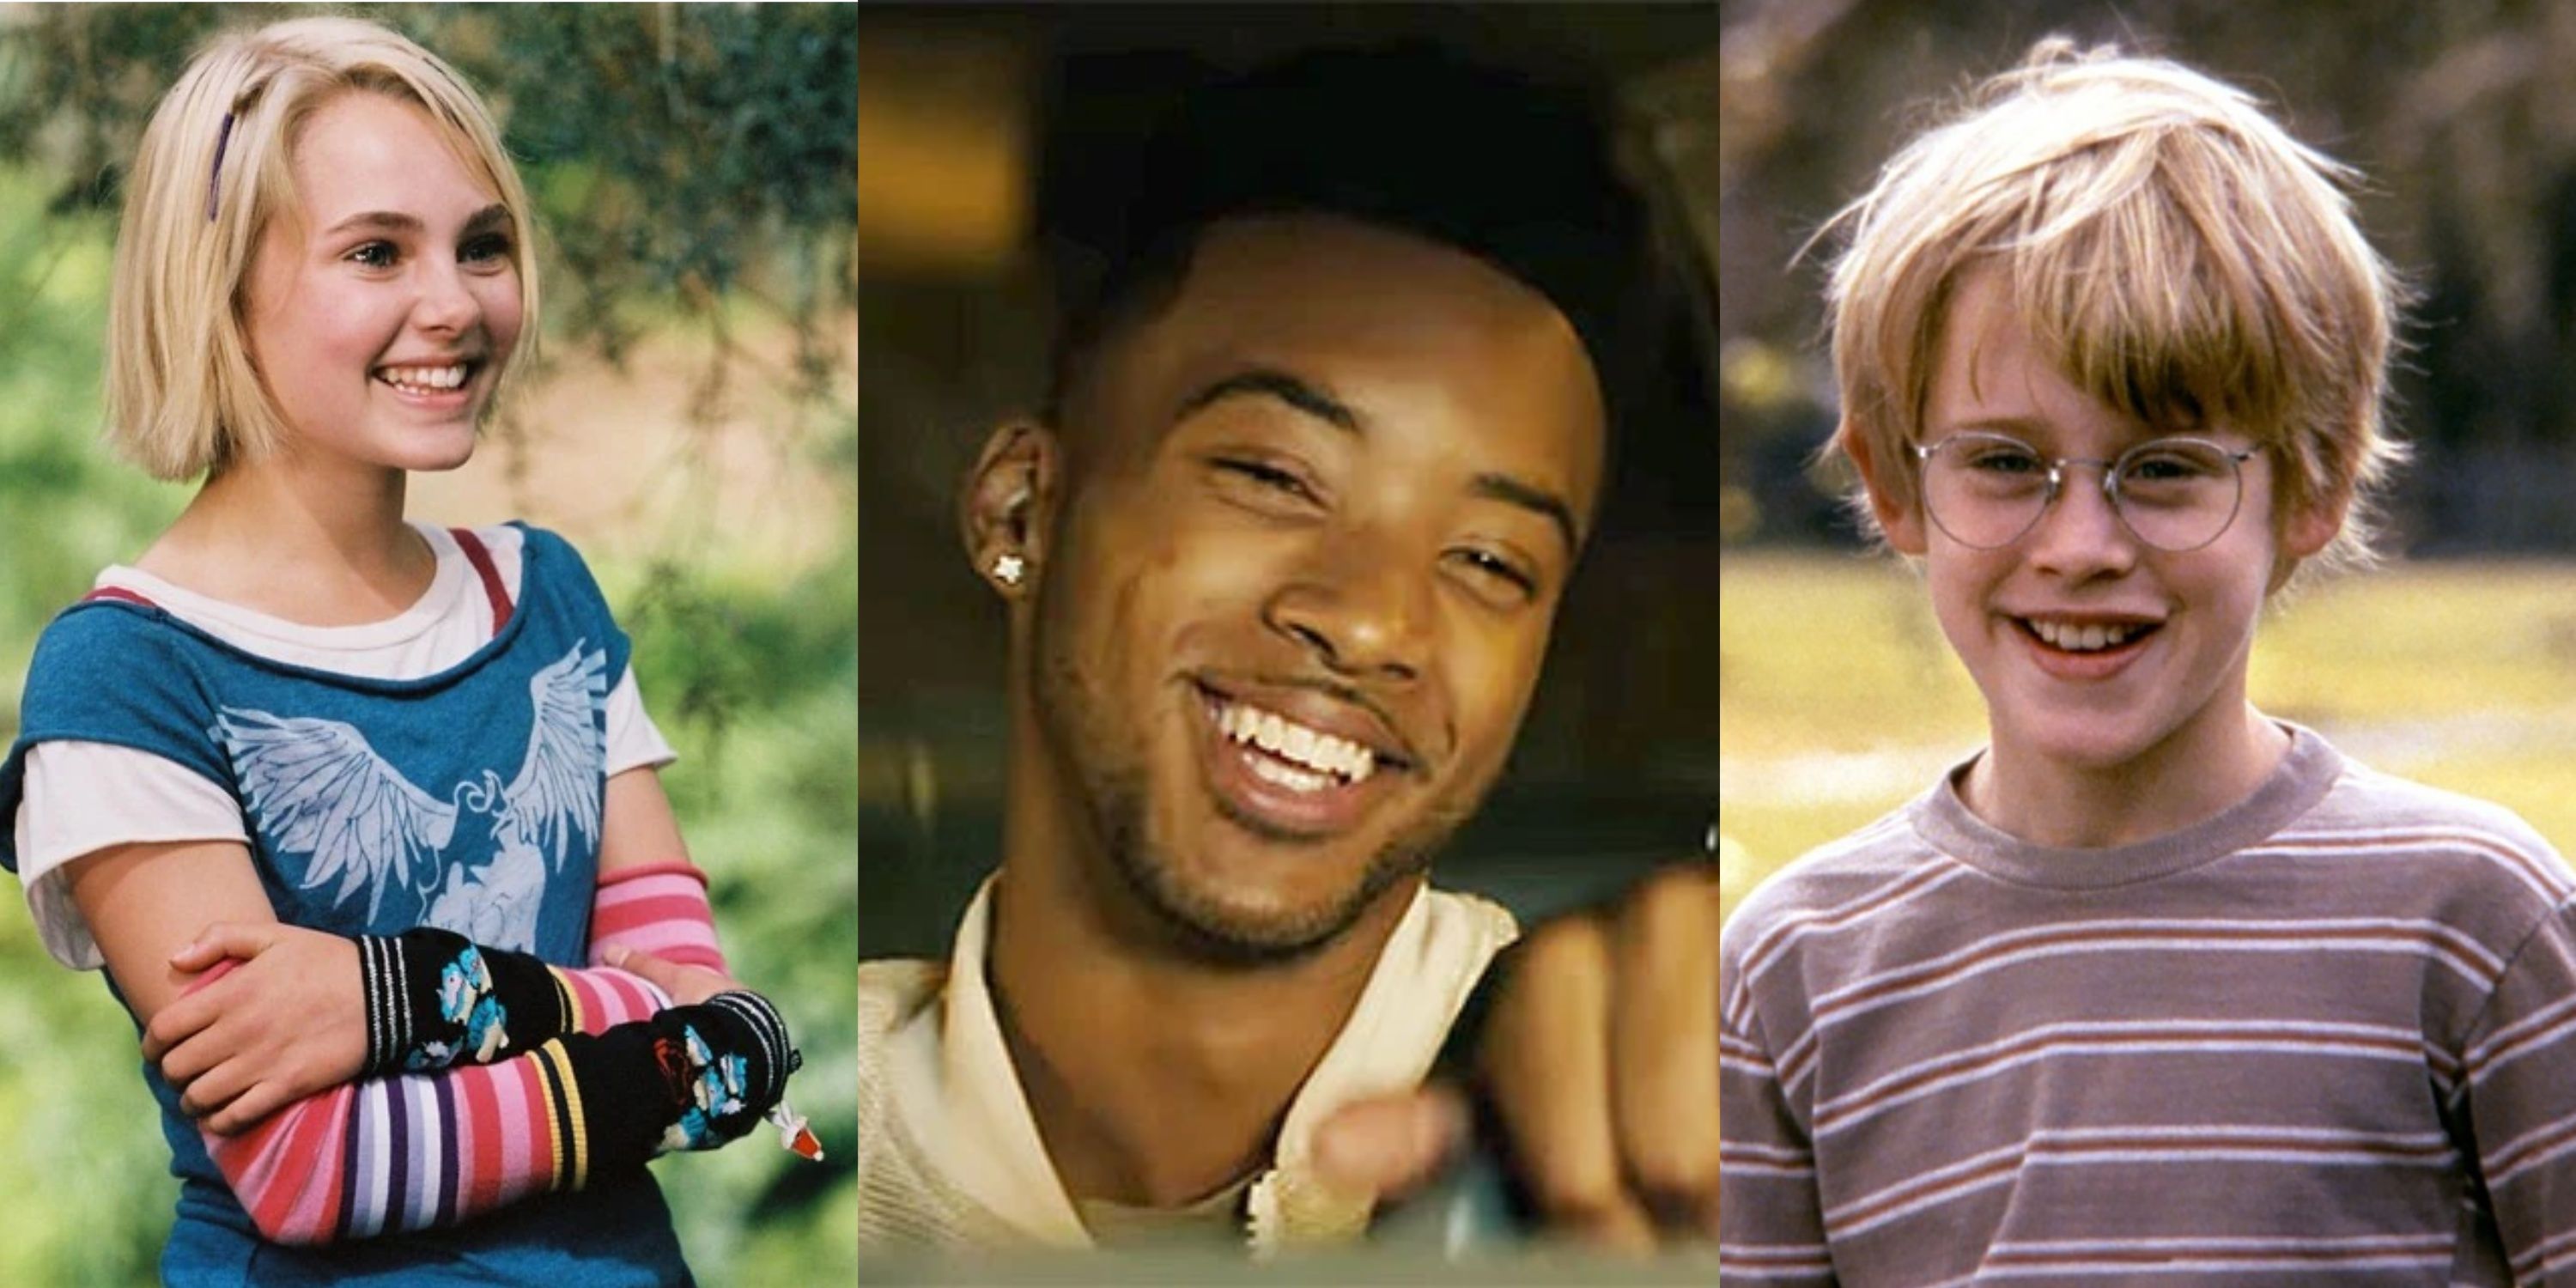 Split image of Leslie Burke with arms crossed, Khalil Harris driving, and Thomas J smiling